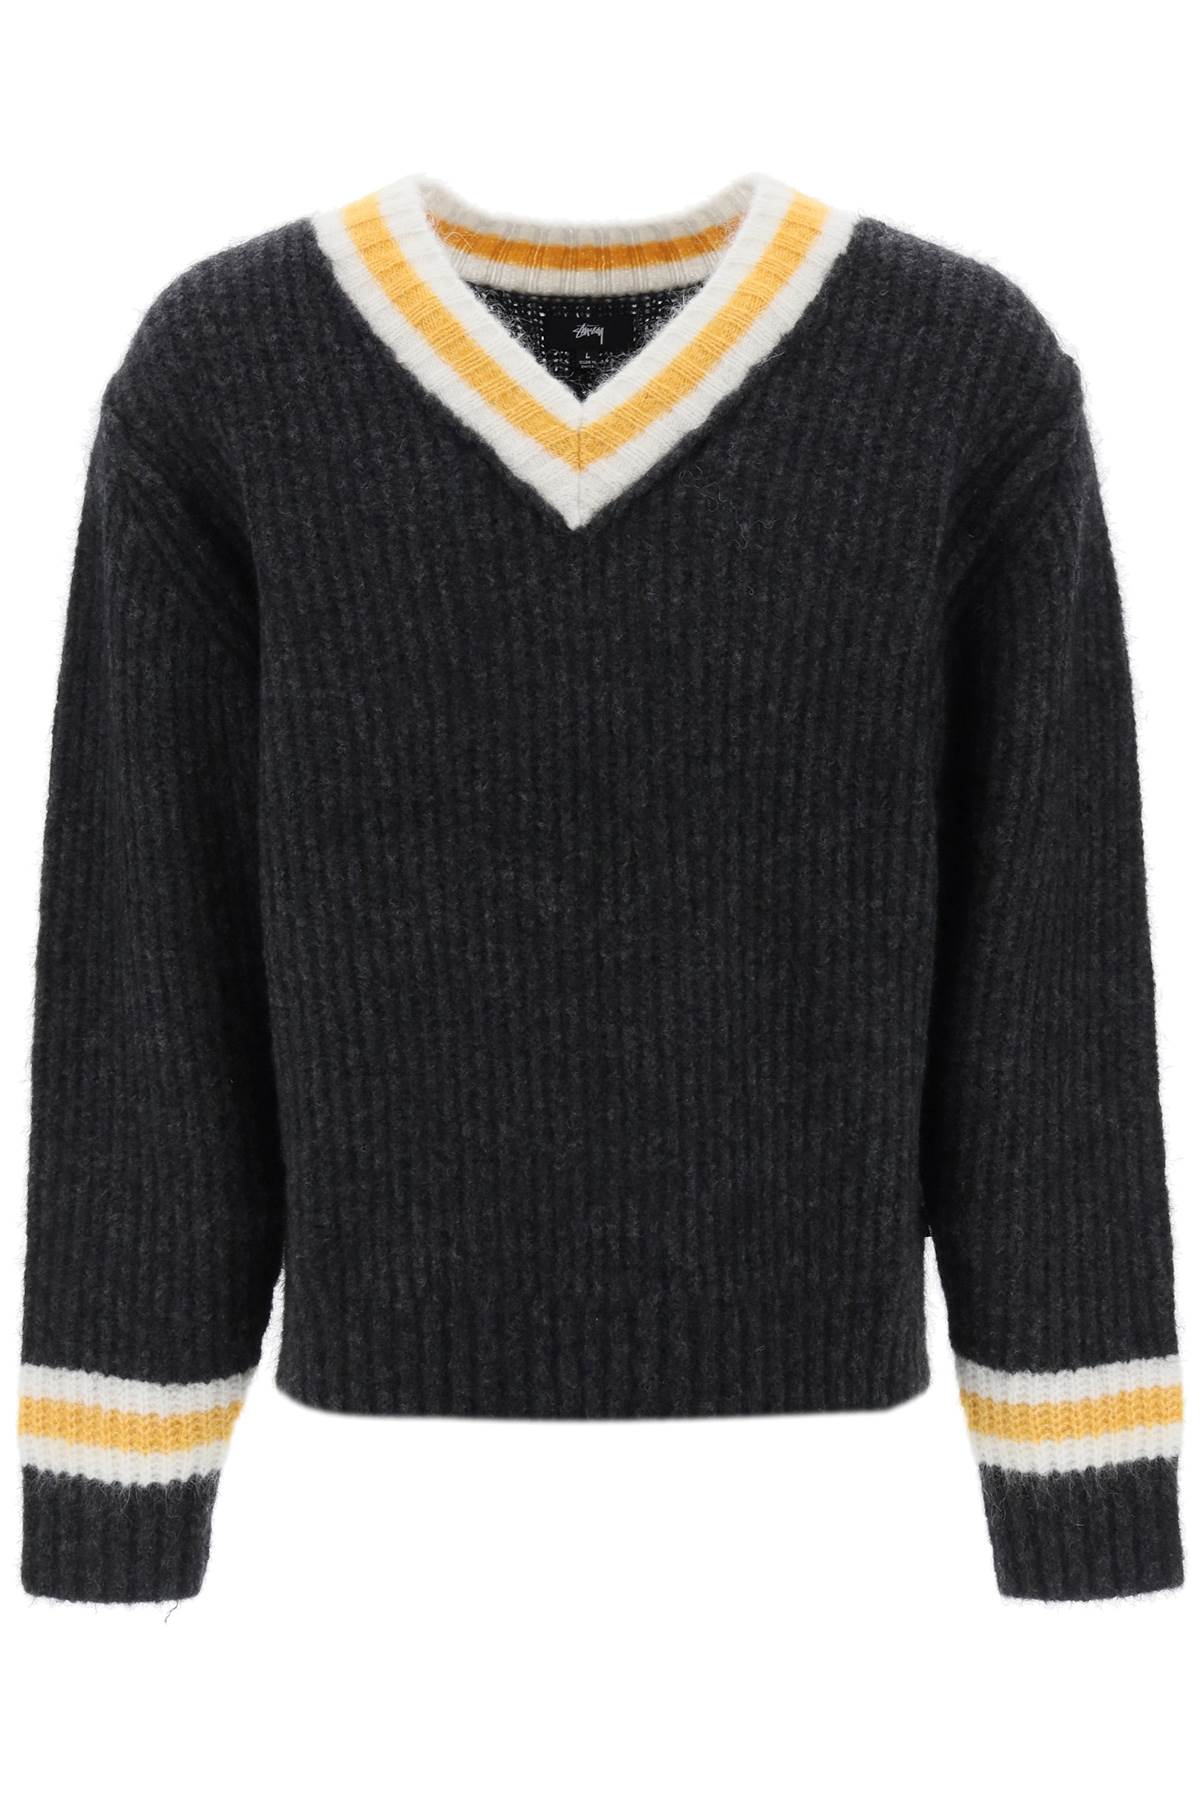 STUSSY WOOL AND MOHAIR TENNIS SWEATER